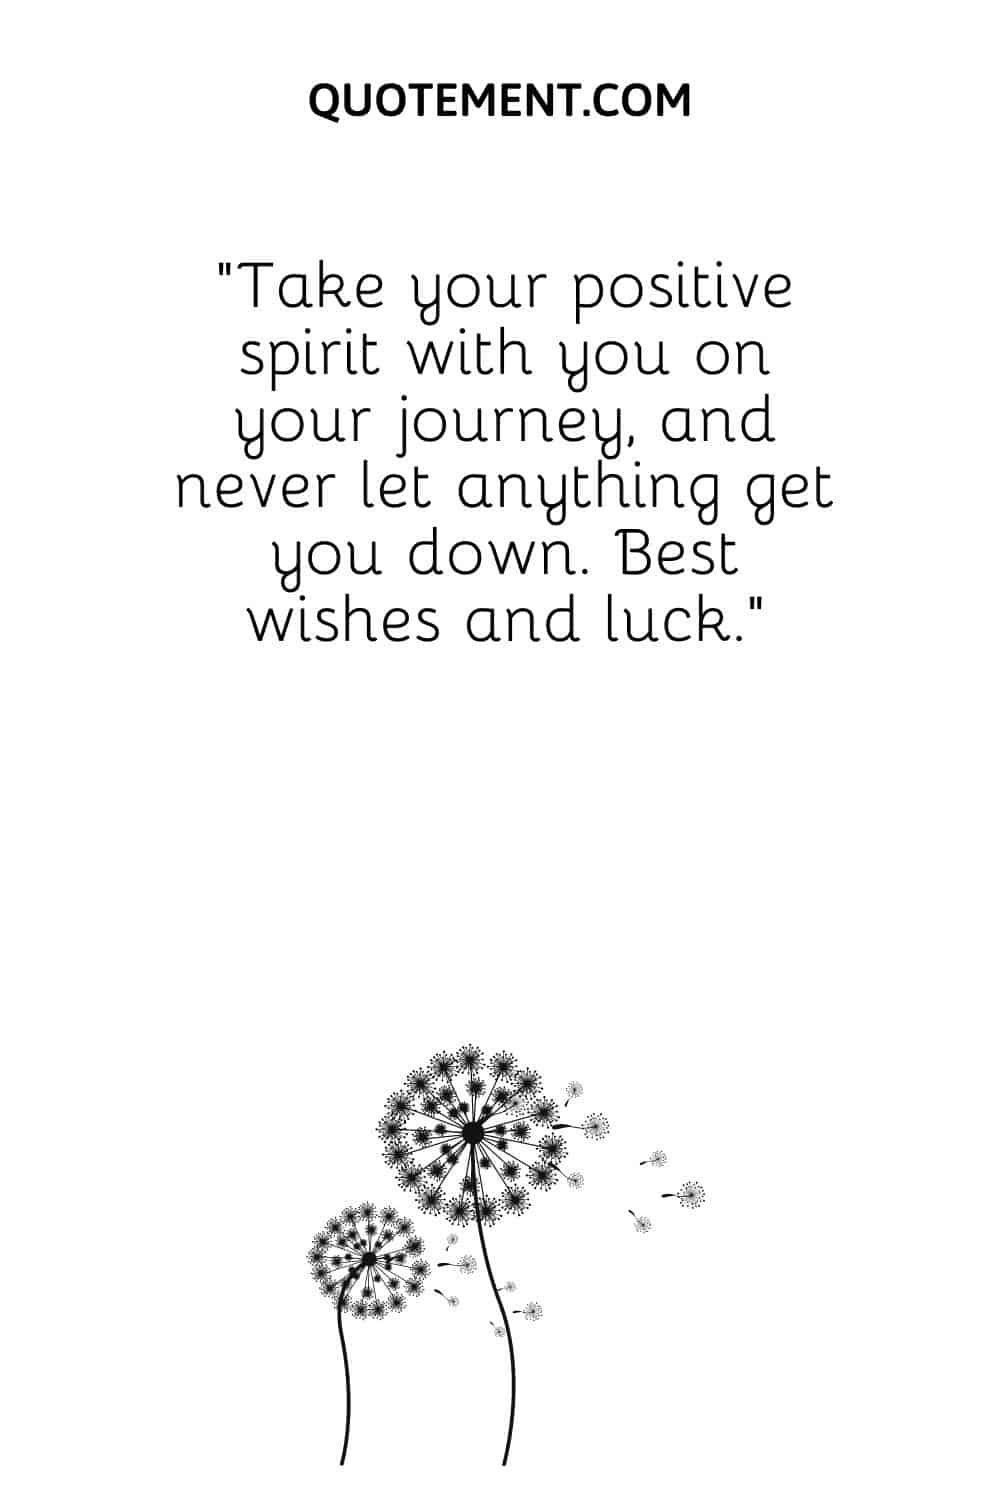 Take your positive spirit with you on your journey